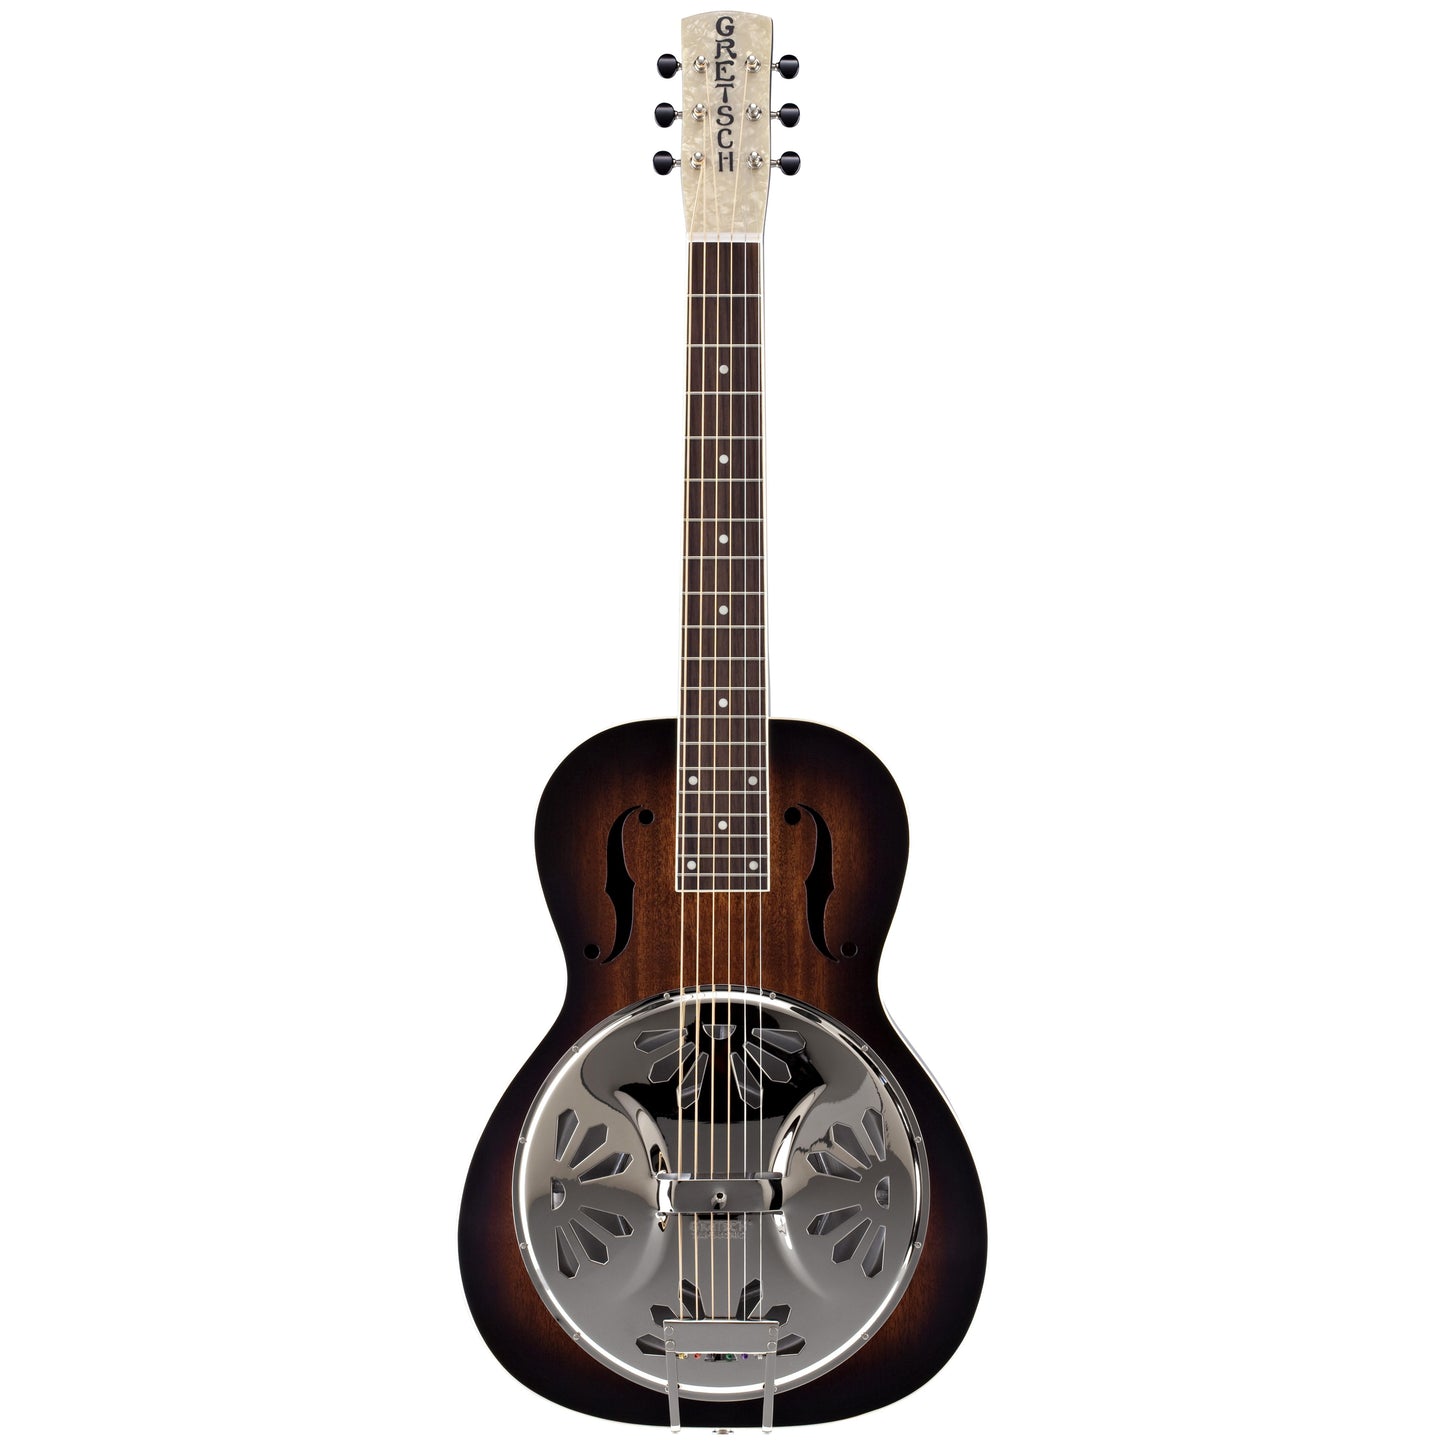 Gretsch Root Series G9230 Bobtail Square Neck Acoustic-Electric Resonator